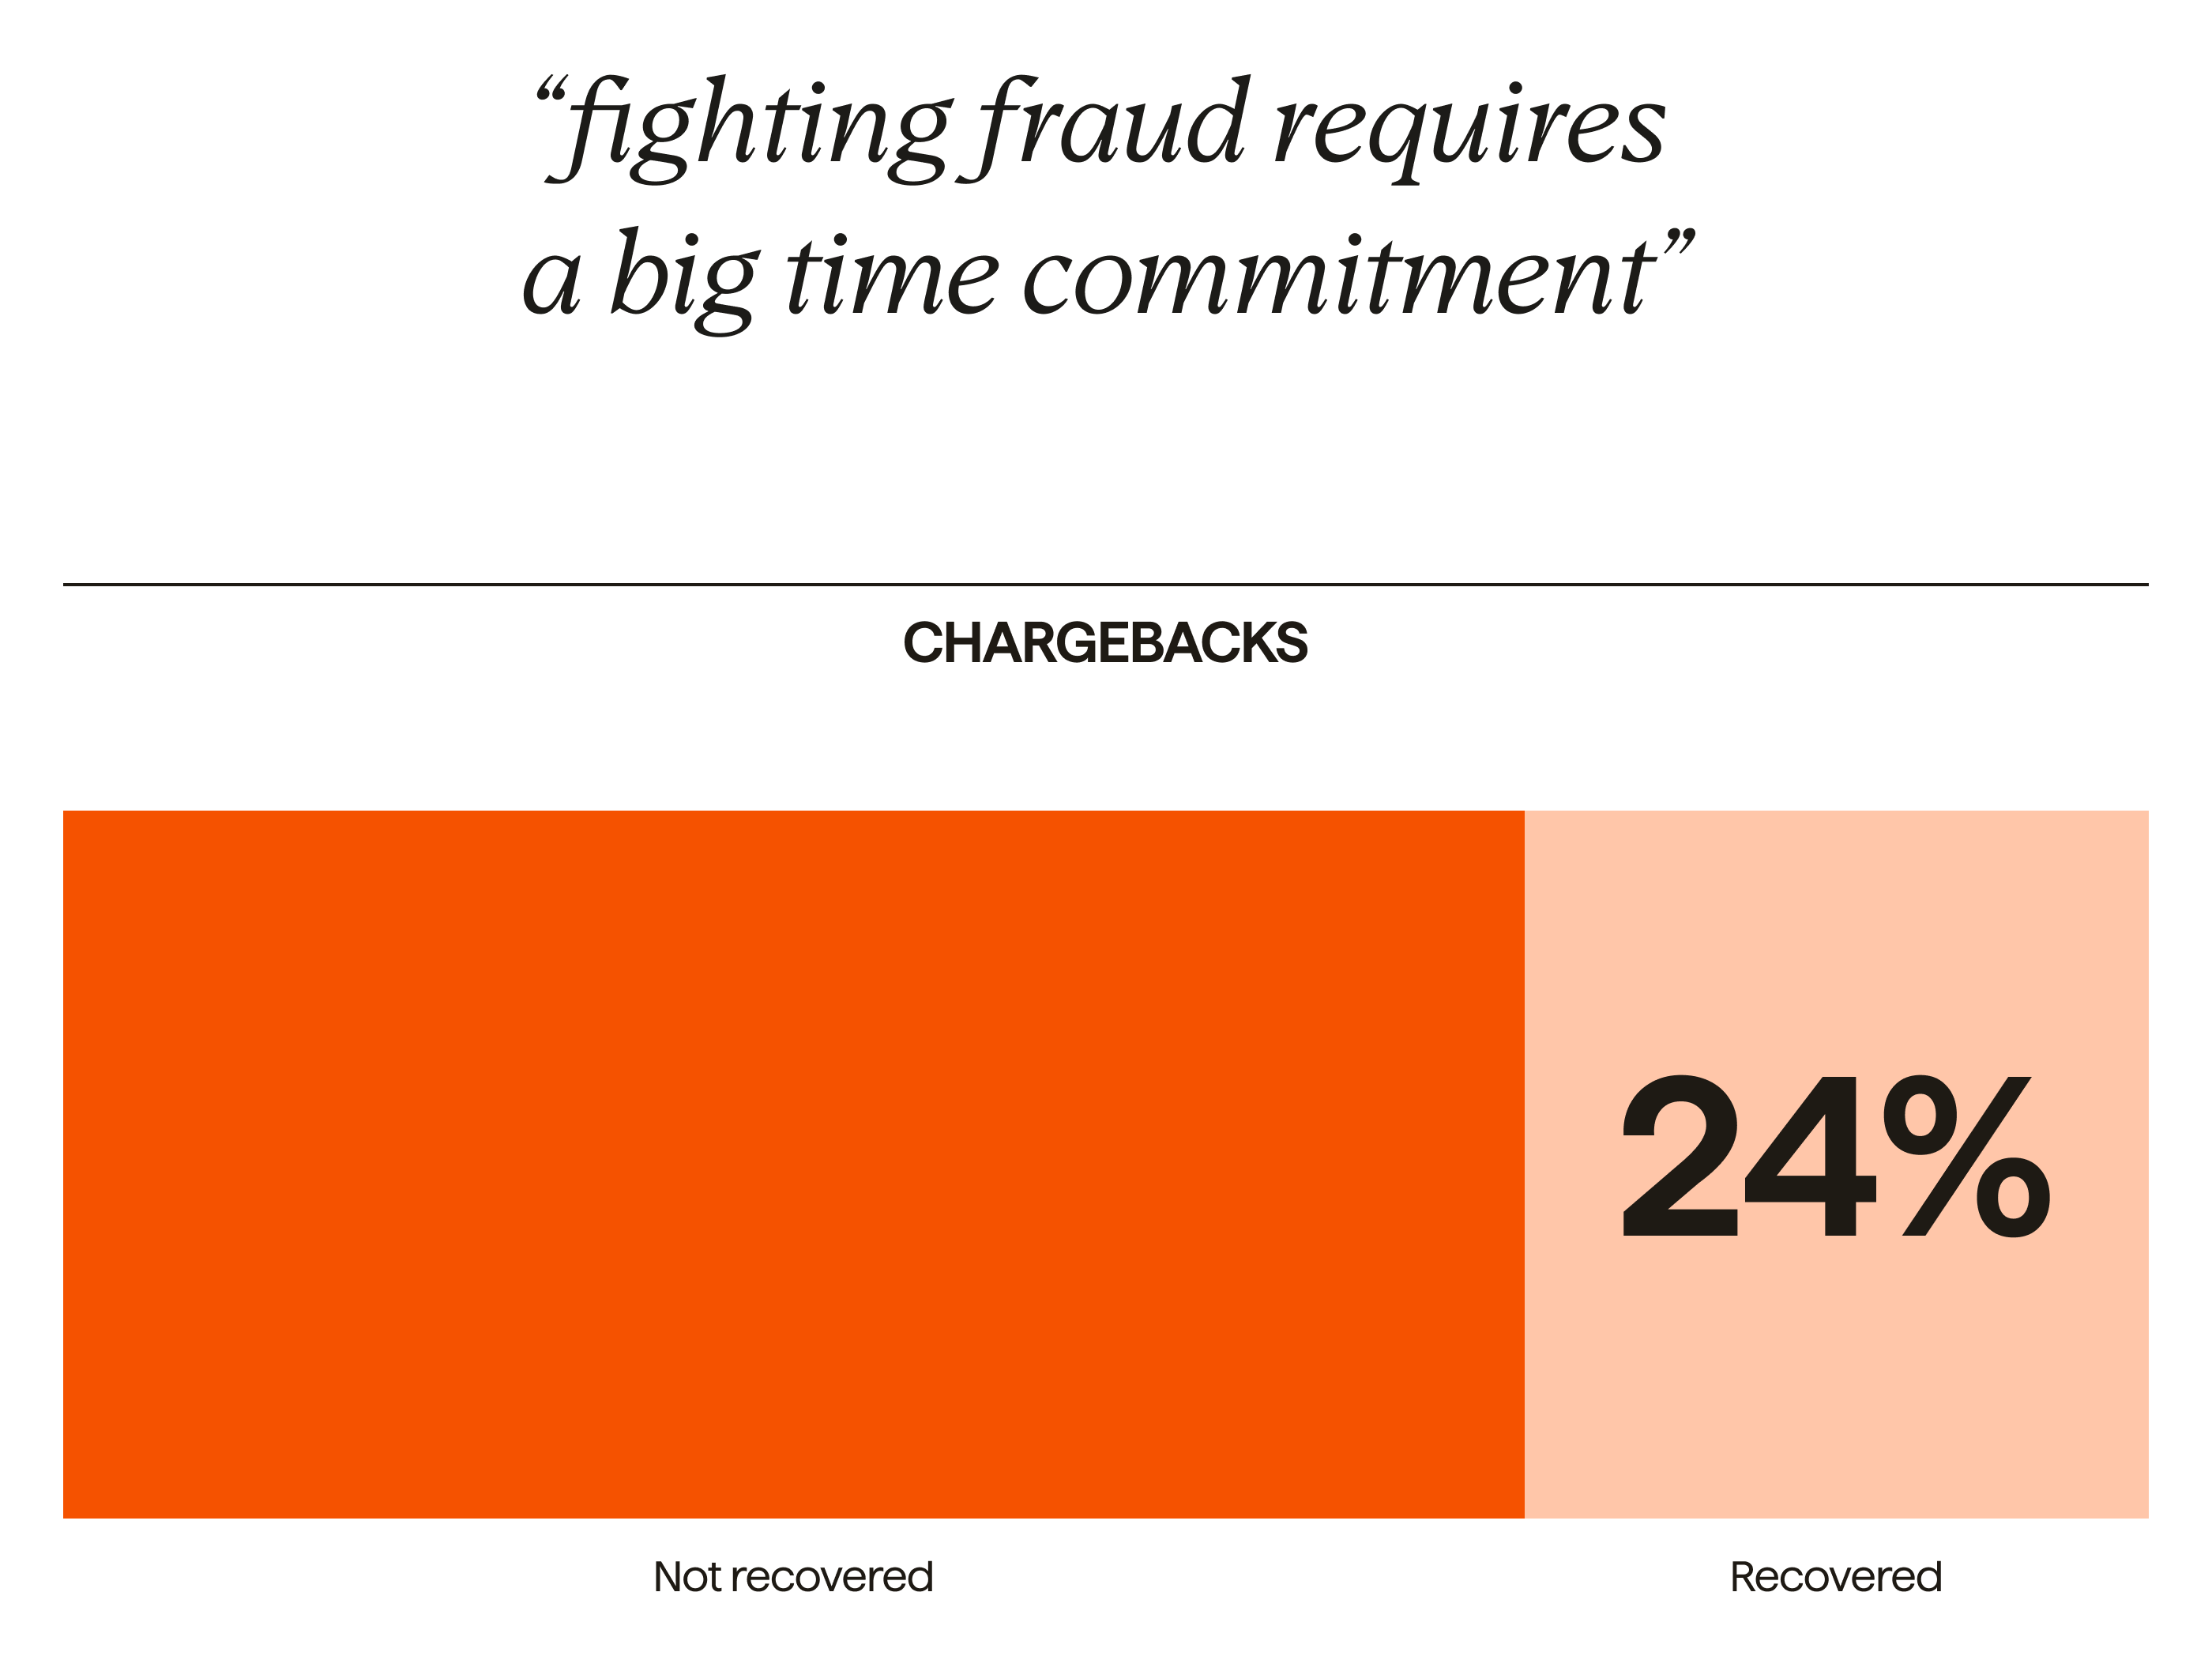 ABM L&F - UKI - blog - levelling up against the new fraud challenge - in-article image 2